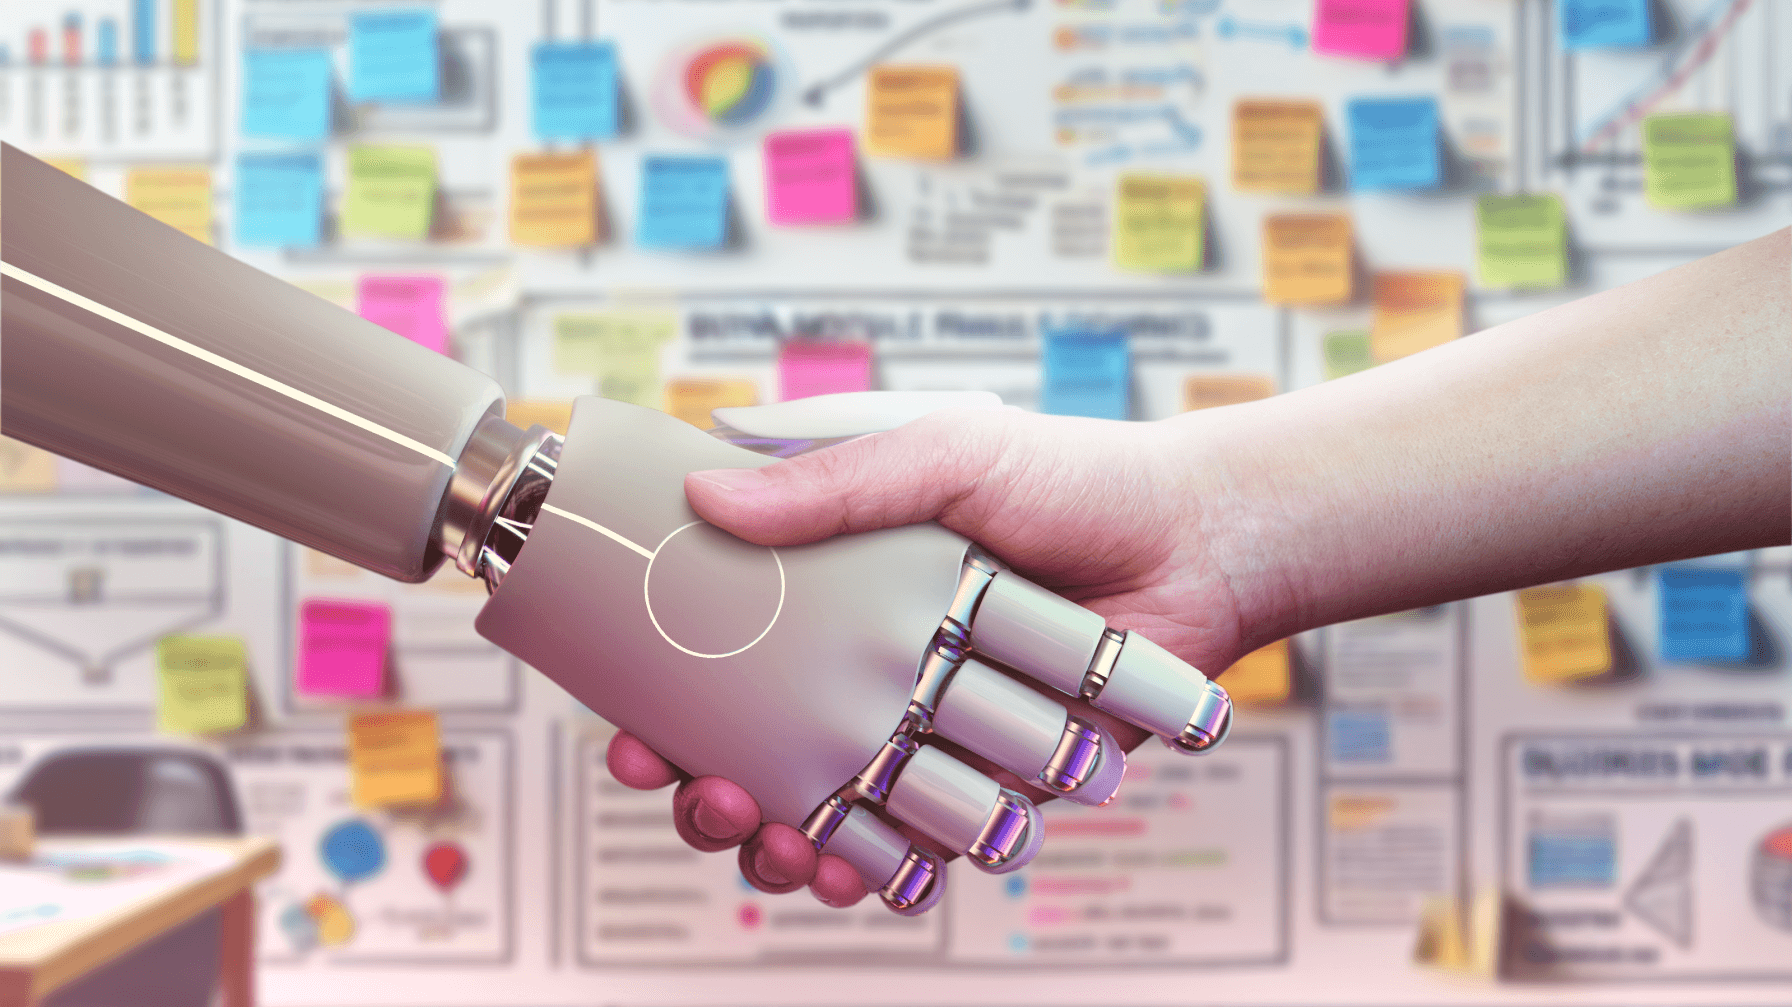 a human arm and a robot arm shaking hands in front of a whiteboard covered in project details, illustrations, and sticky notes